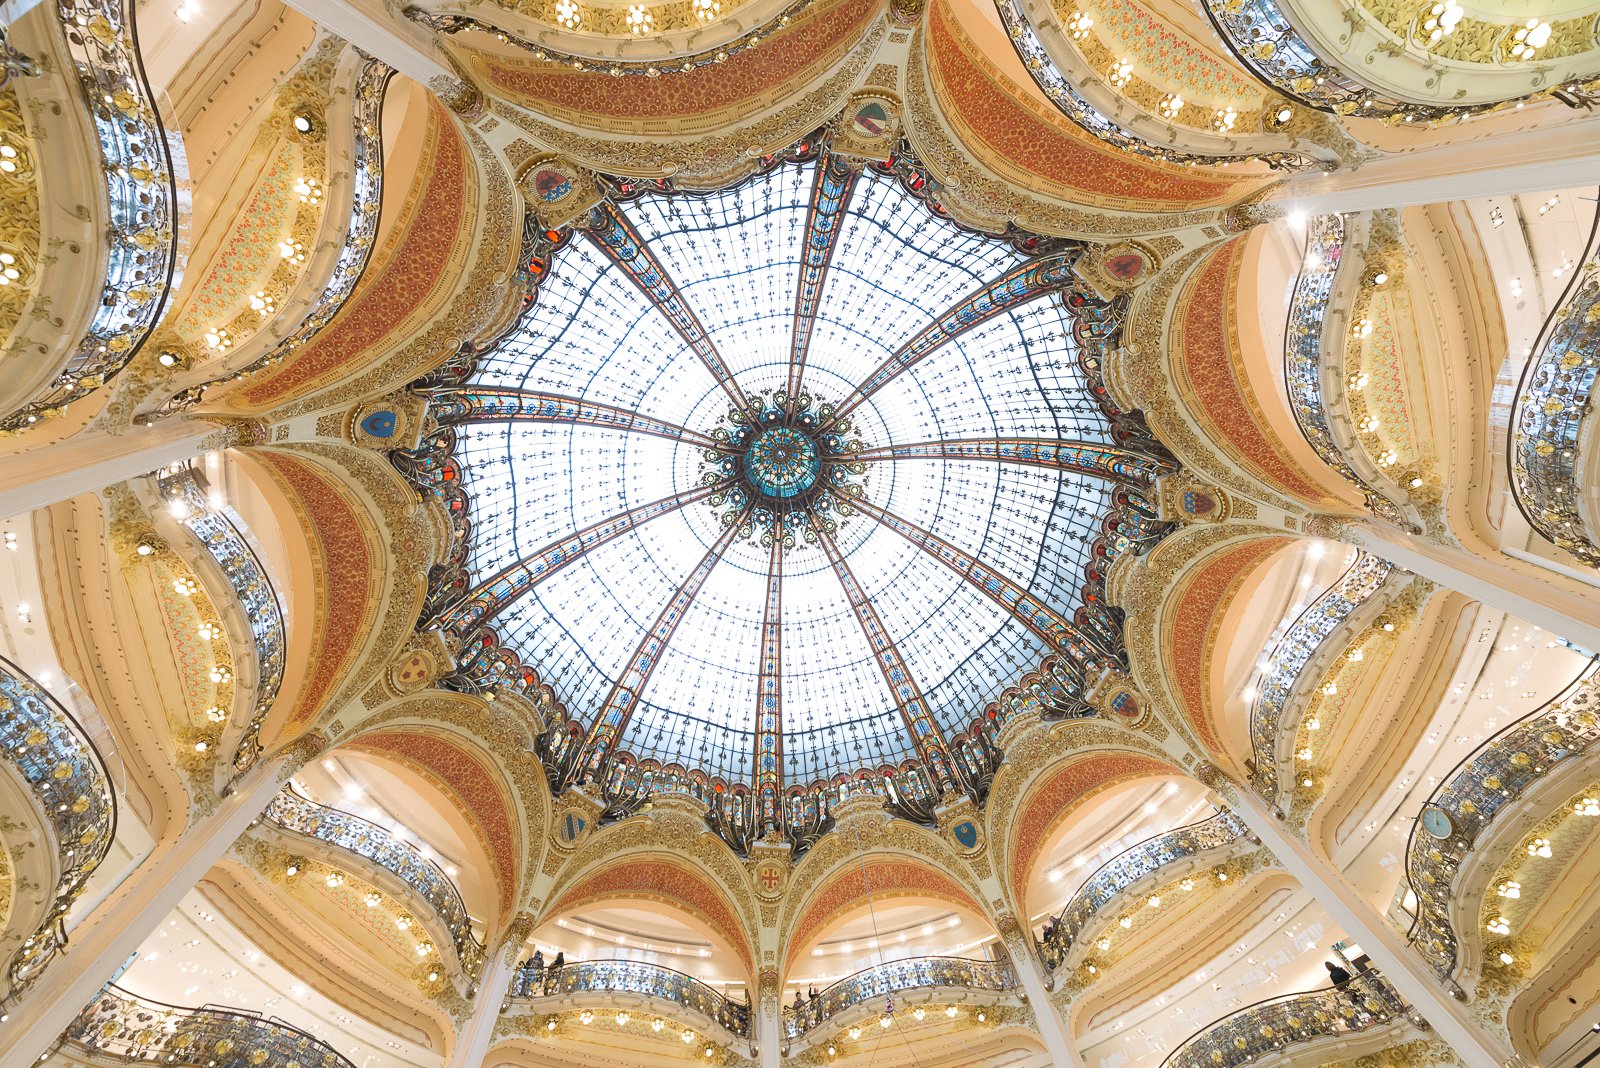 Galeries Lafayette - All You Need to Know BEFORE You Go (with Photos)